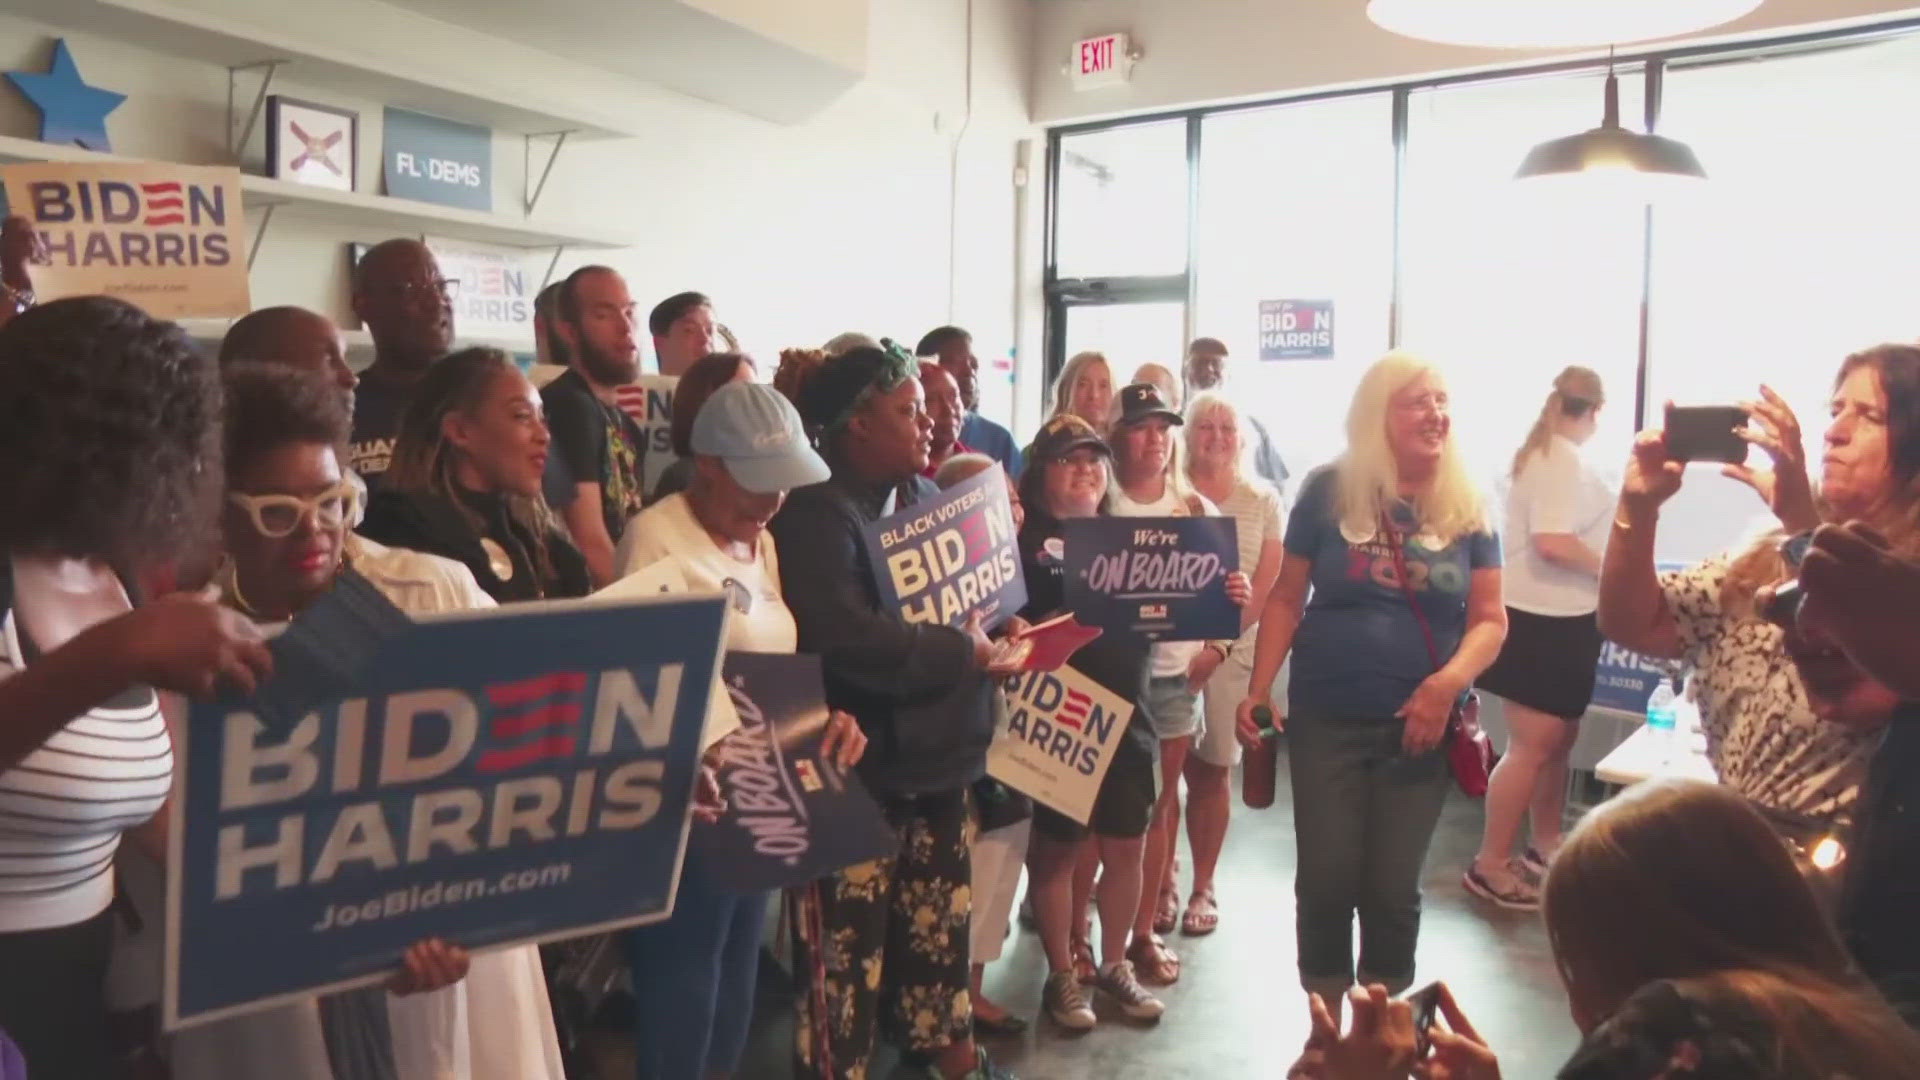 Jacksonville City Councilman Rahman Johnson was at Saturday's event and said it serves as his official endorsement of the Biden-Harris campaign.